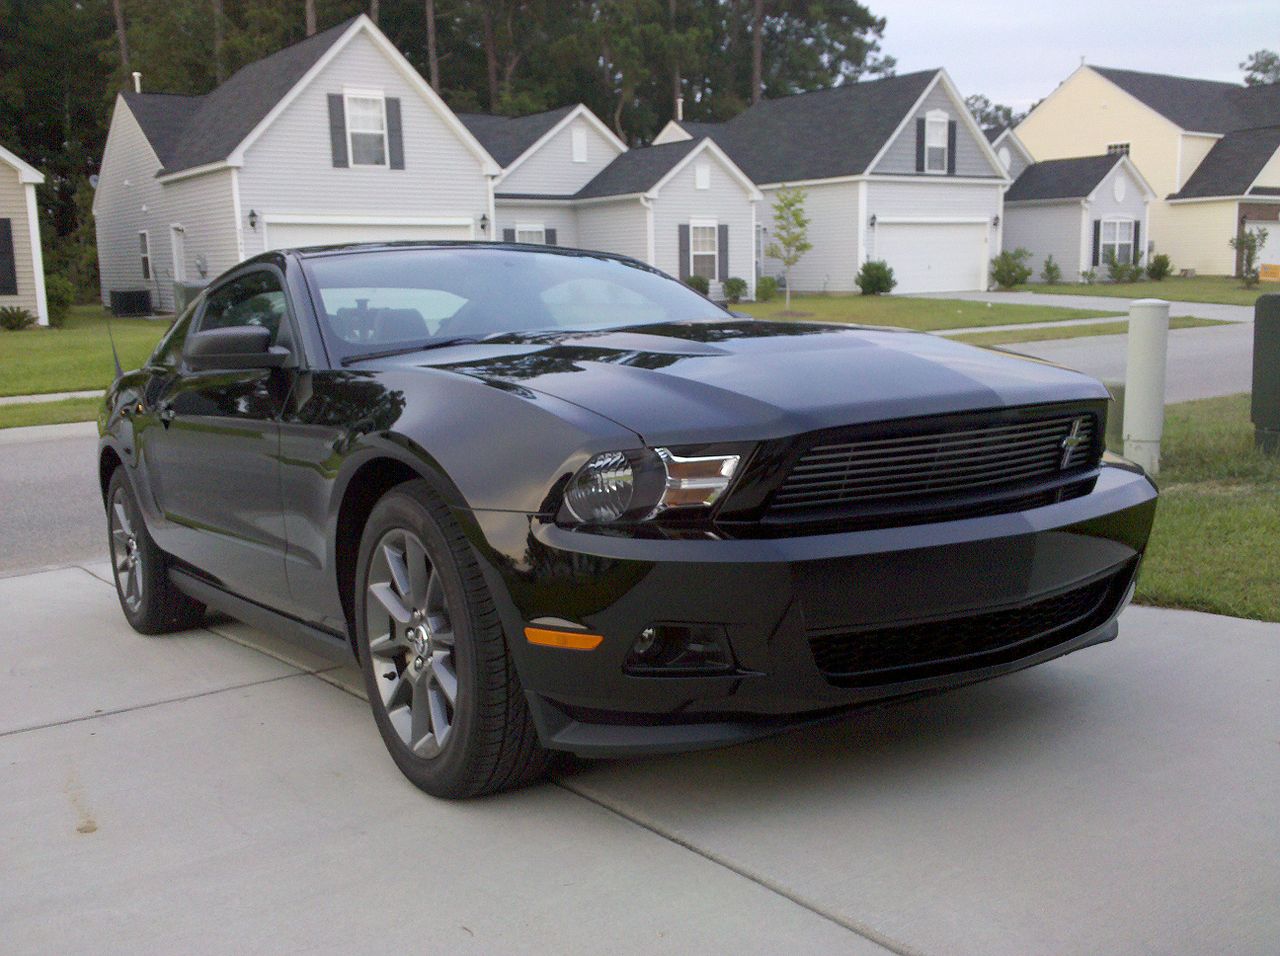 Black 2011 Ford Mustang fastback coupe parked in the driveway of a suburban neighborhood